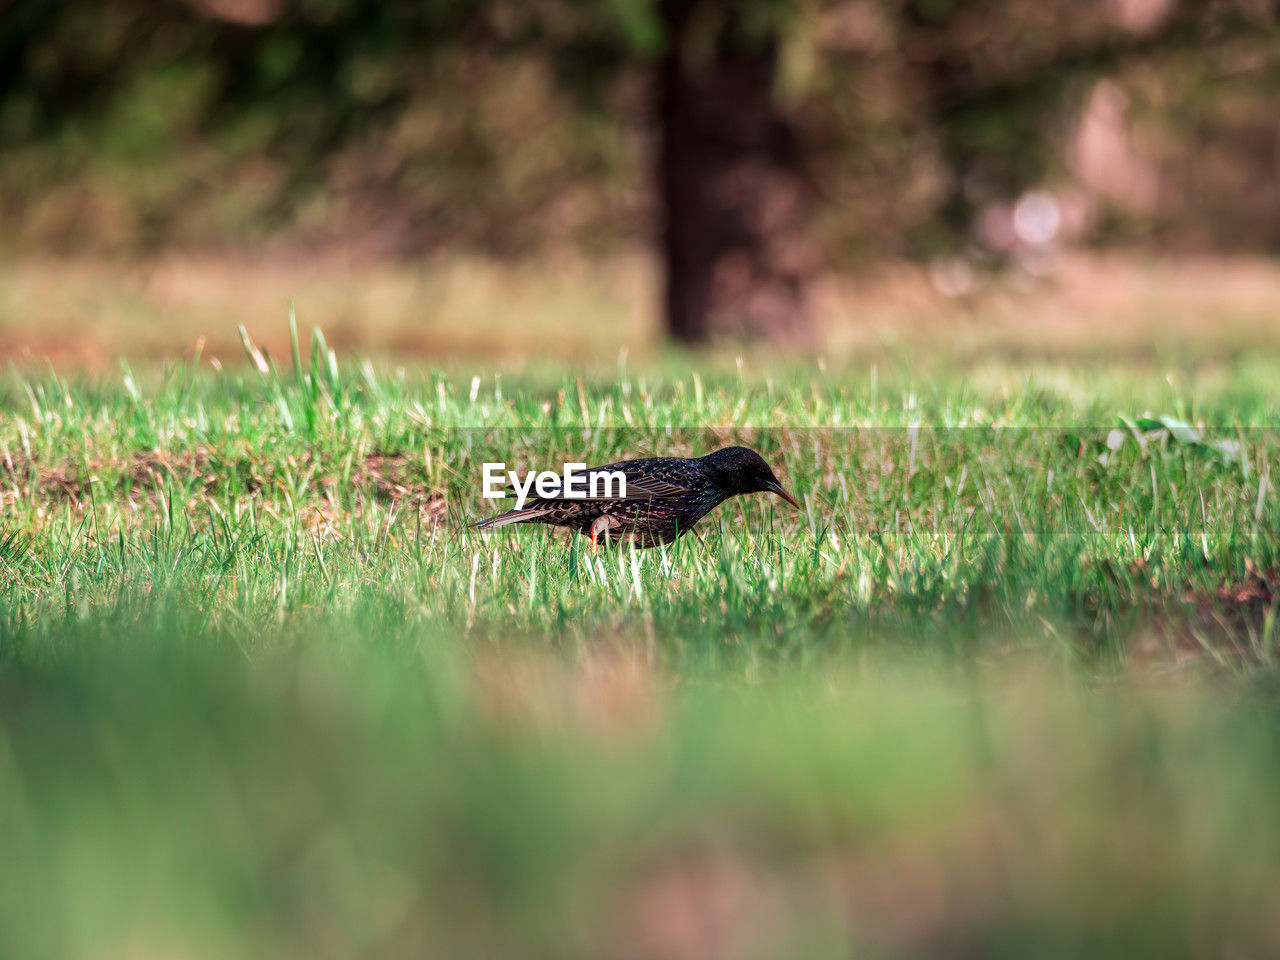 animal themes, animal, nature, green, grass, animal wildlife, one animal, wildlife, bird, plant, selective focus, no people, lawn, outdoors, day, leaf, side view, land, meadow, prairie